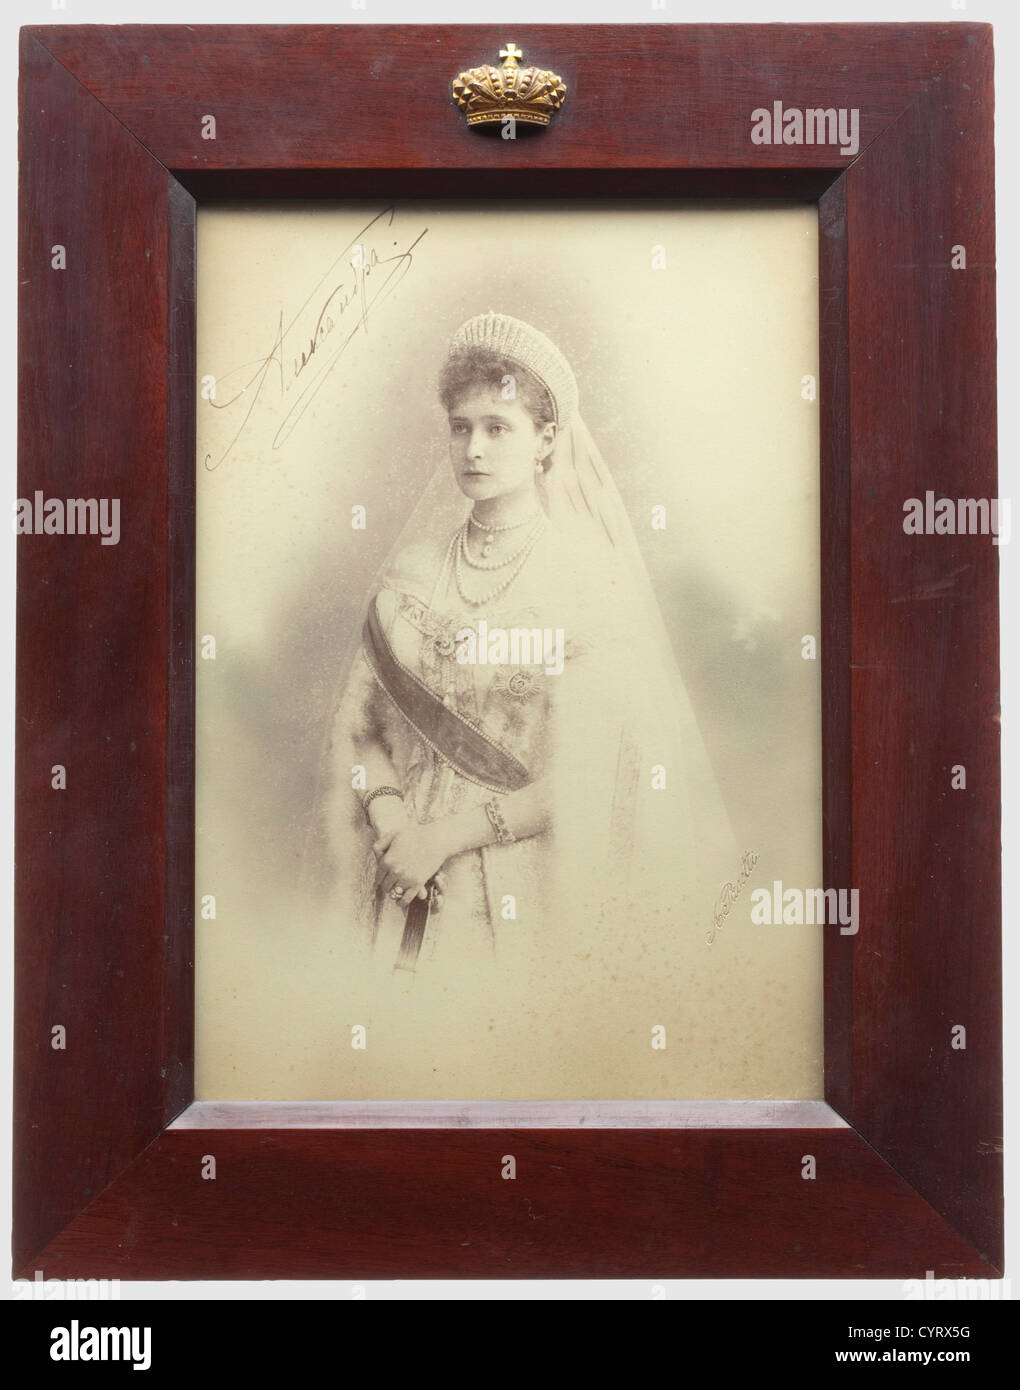 Portrait photo of Tsarina Alexandra Feodorovna, with handwritten signature in ink Russia, ca. 1900. The right edge with embossed signature of the court photographer 'A. Pasetti'. Printed in gold on the back the photographer's name with several medals. Slightly stained. Under glass, in brown lacquered wood frame, the top applied with a gold bronzed imperial crown of brass. The frame stand at back missing. Picture ca. 21.6 x 15 cm, frame 30.3 x 23.5 cm. Alexander Ivanovich Pasetti studied at the Saint Petersburg art academy and won silver medals there in 1872 and, Stock Photo